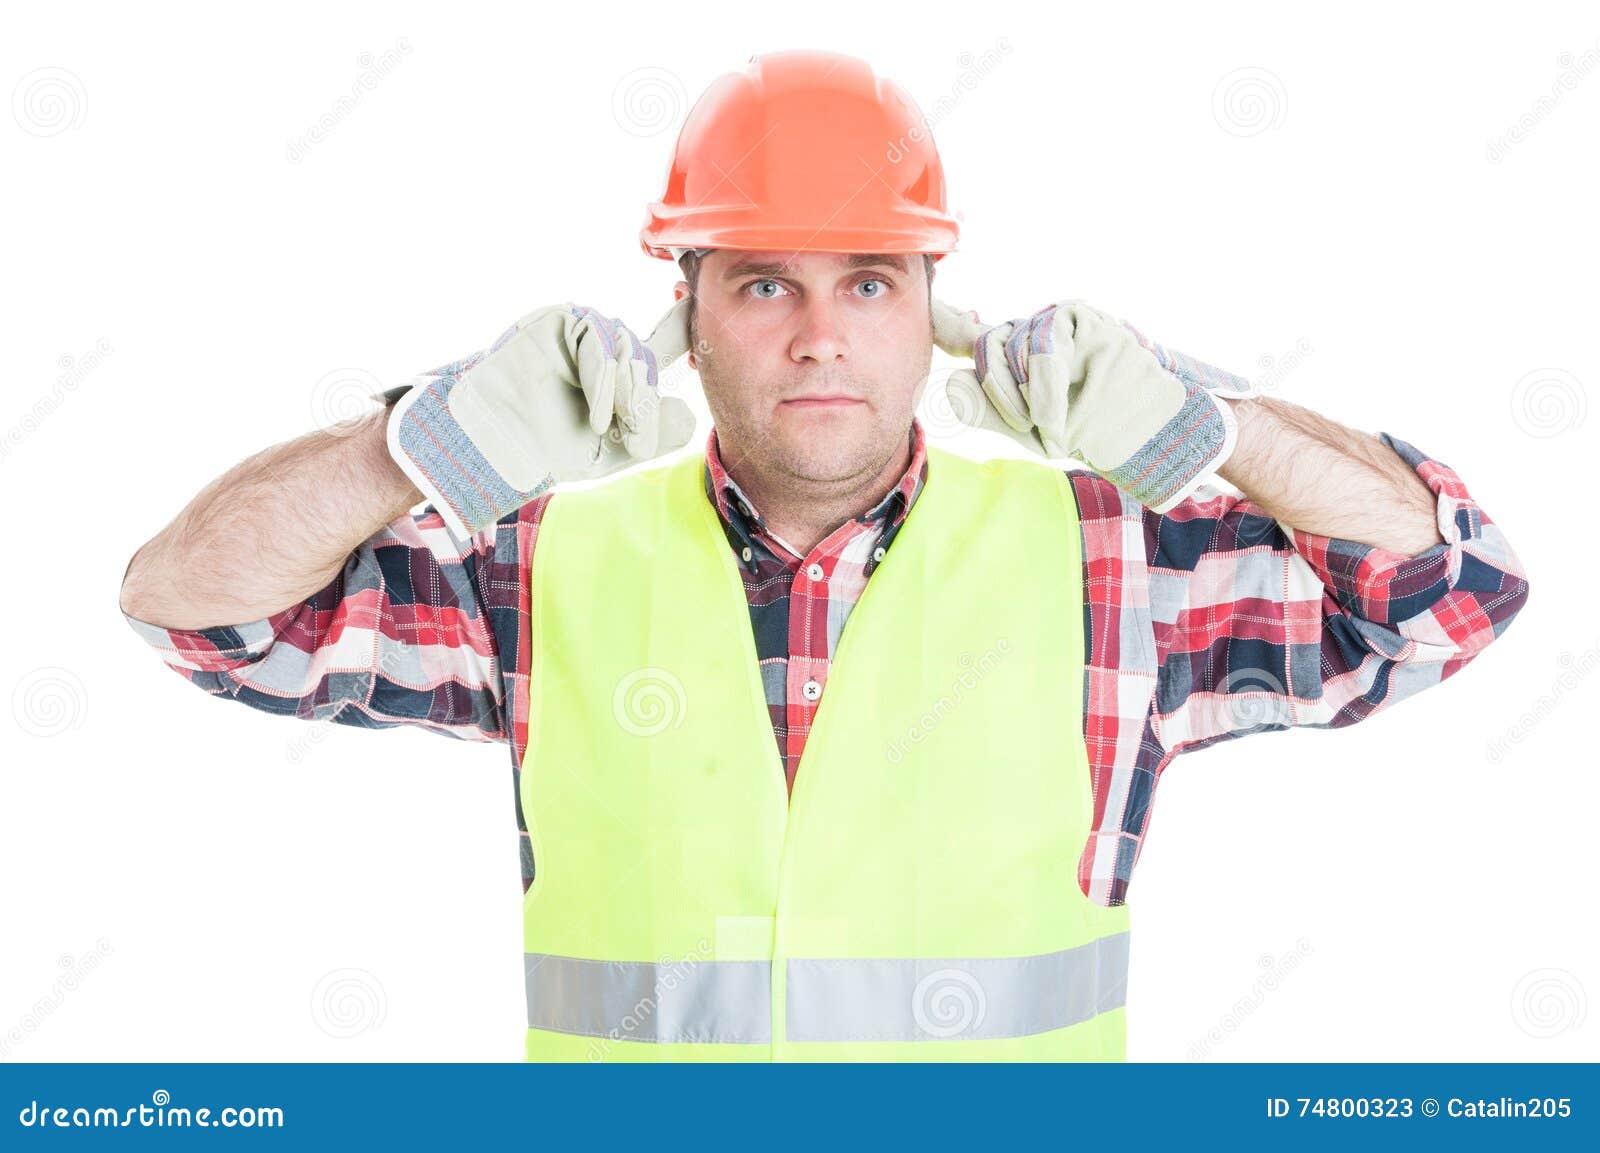 Hear No Evil Concept with Attractive Male Builder Stock Image - Image ...